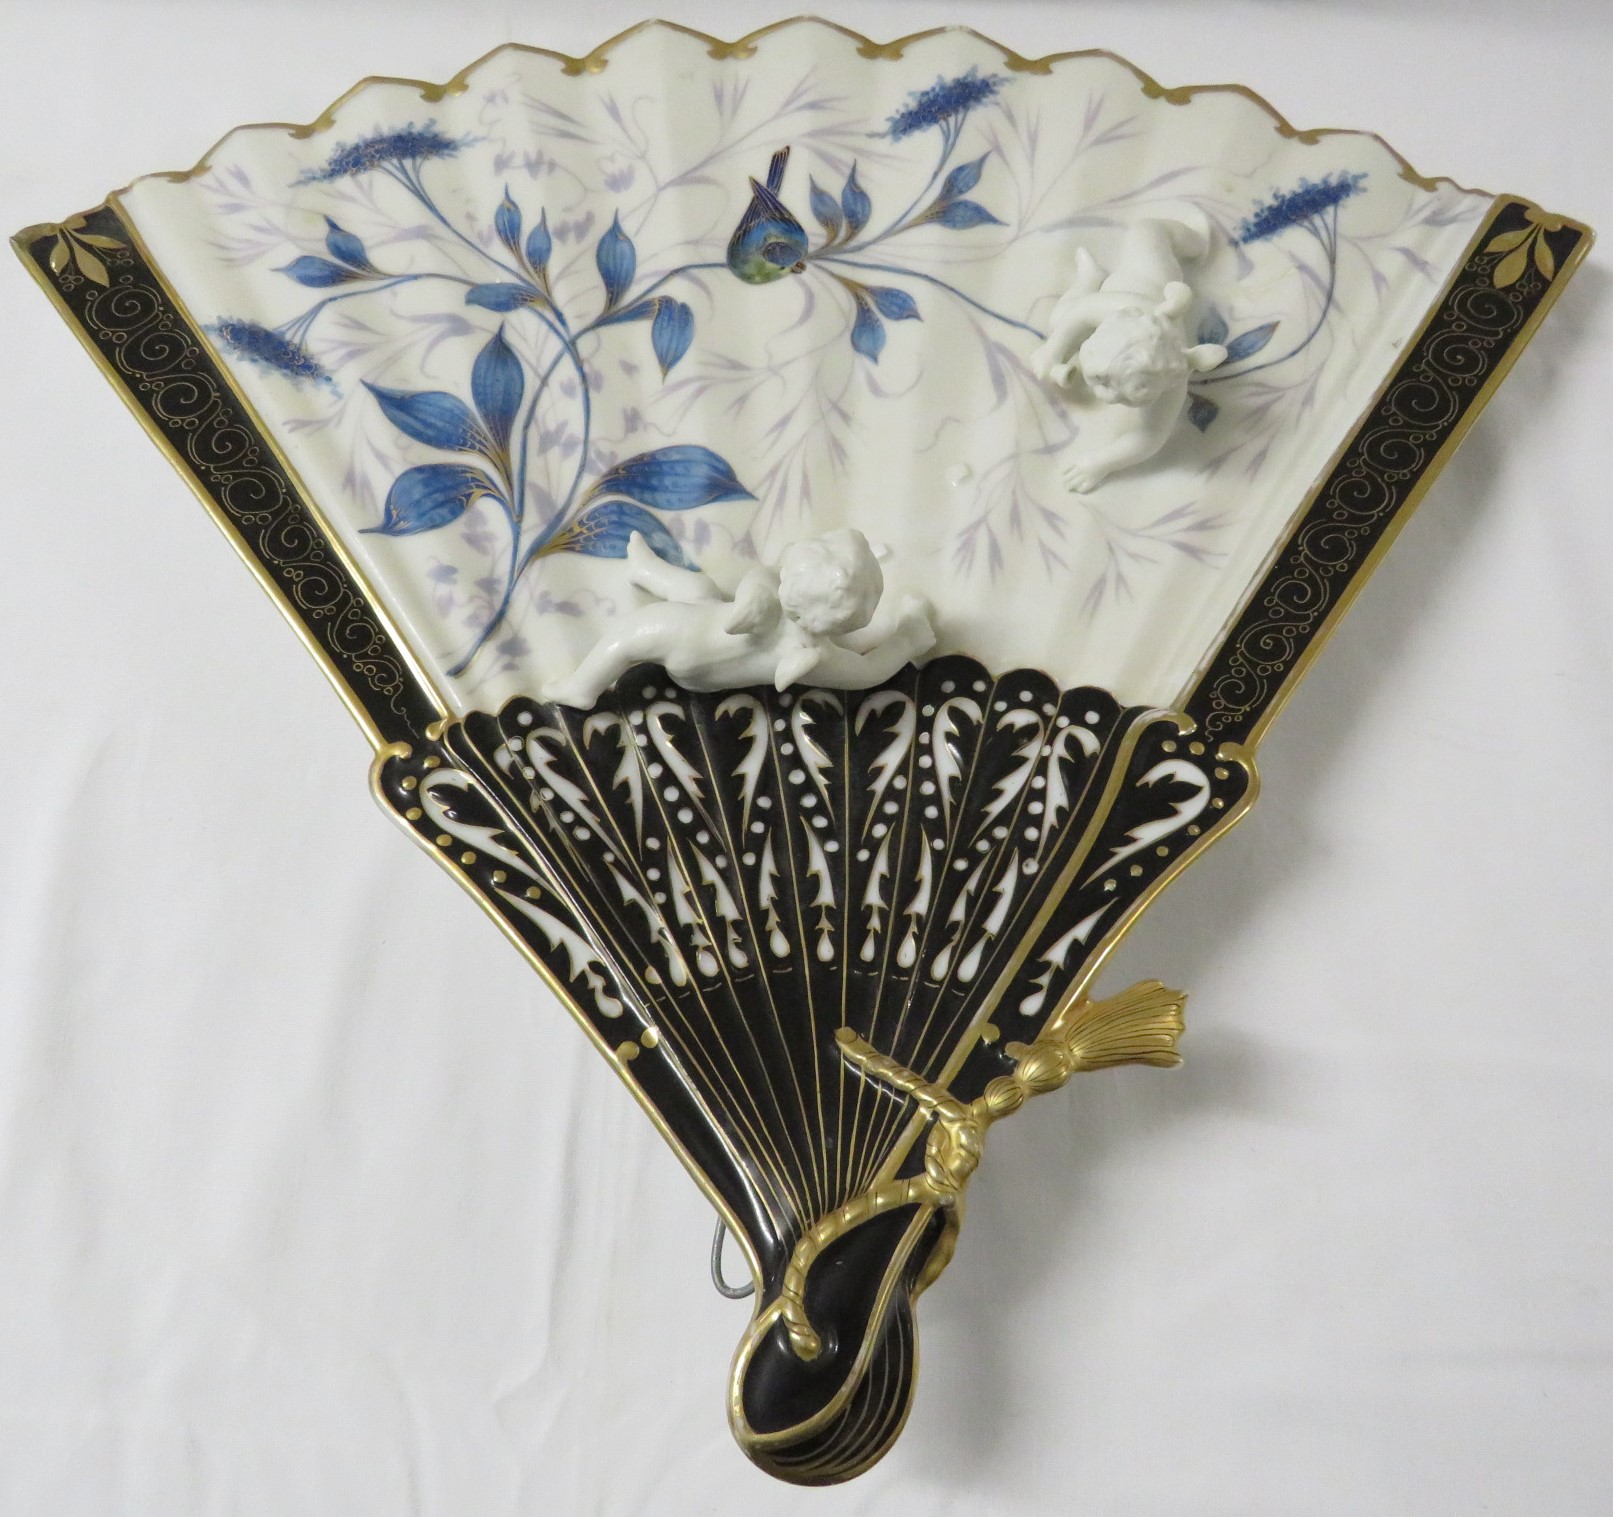 Porcelain wall plaque modelled as a fan with two moulded cherubs, black enamel and gilding and - Image 5 of 6